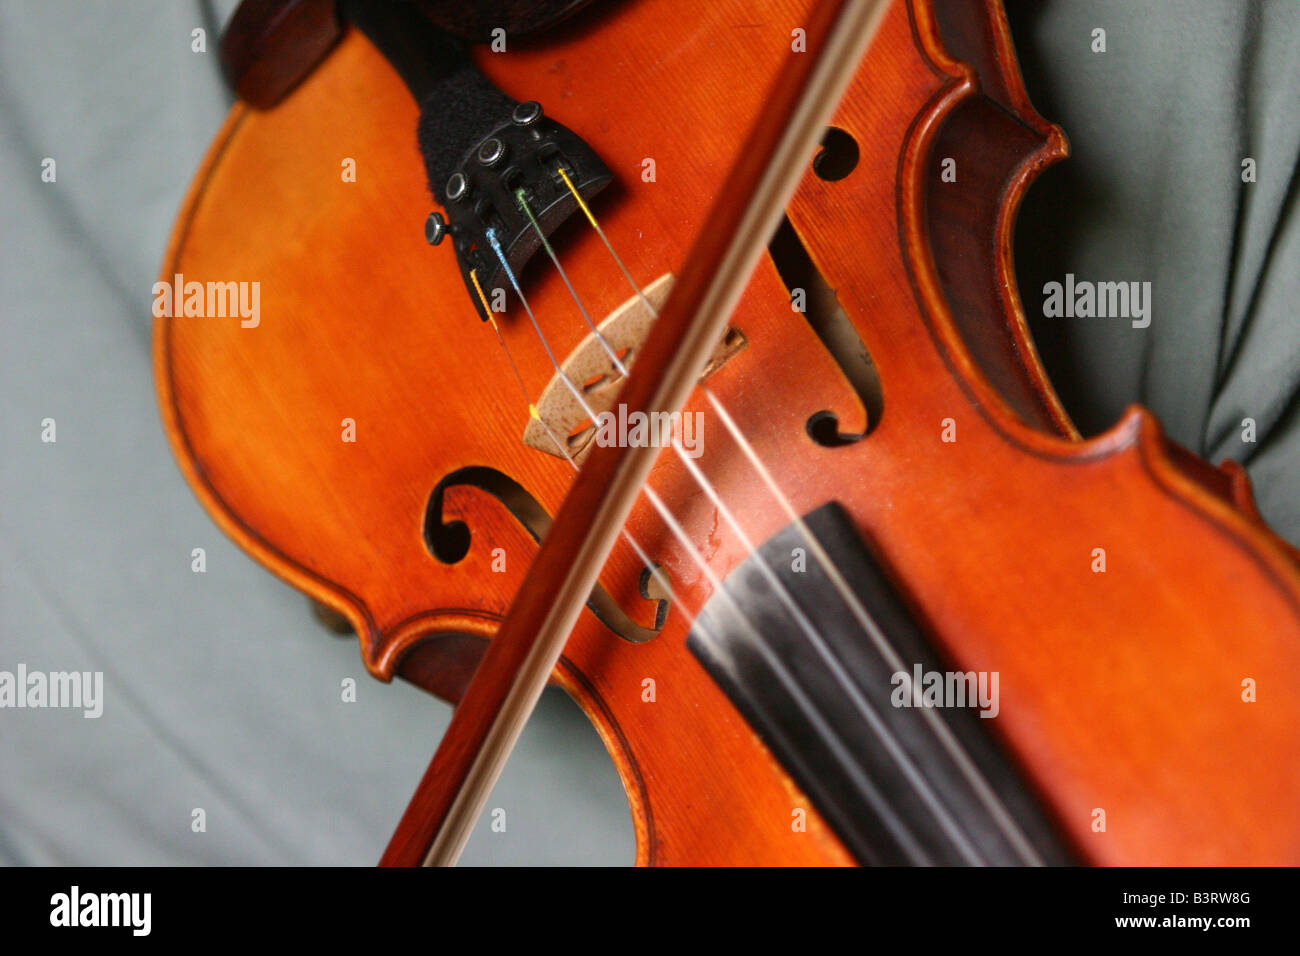 Musicians hands playing a fiddle Stock Photo